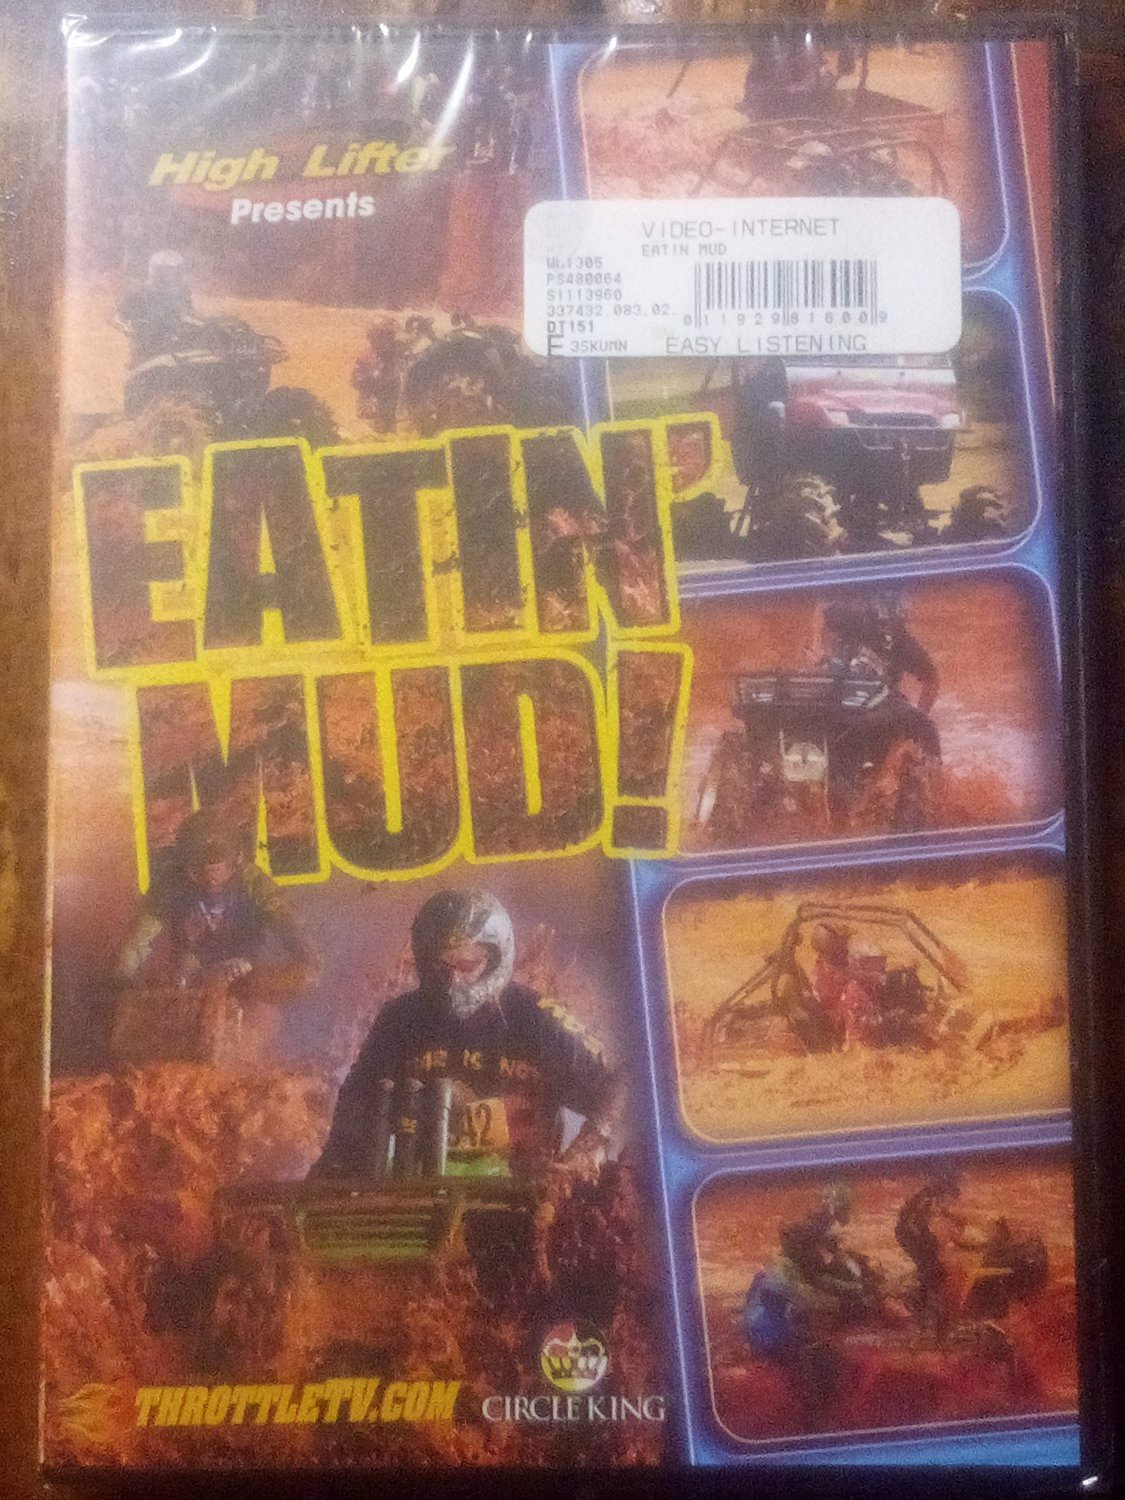 High Lifter presents , Eating Mud!